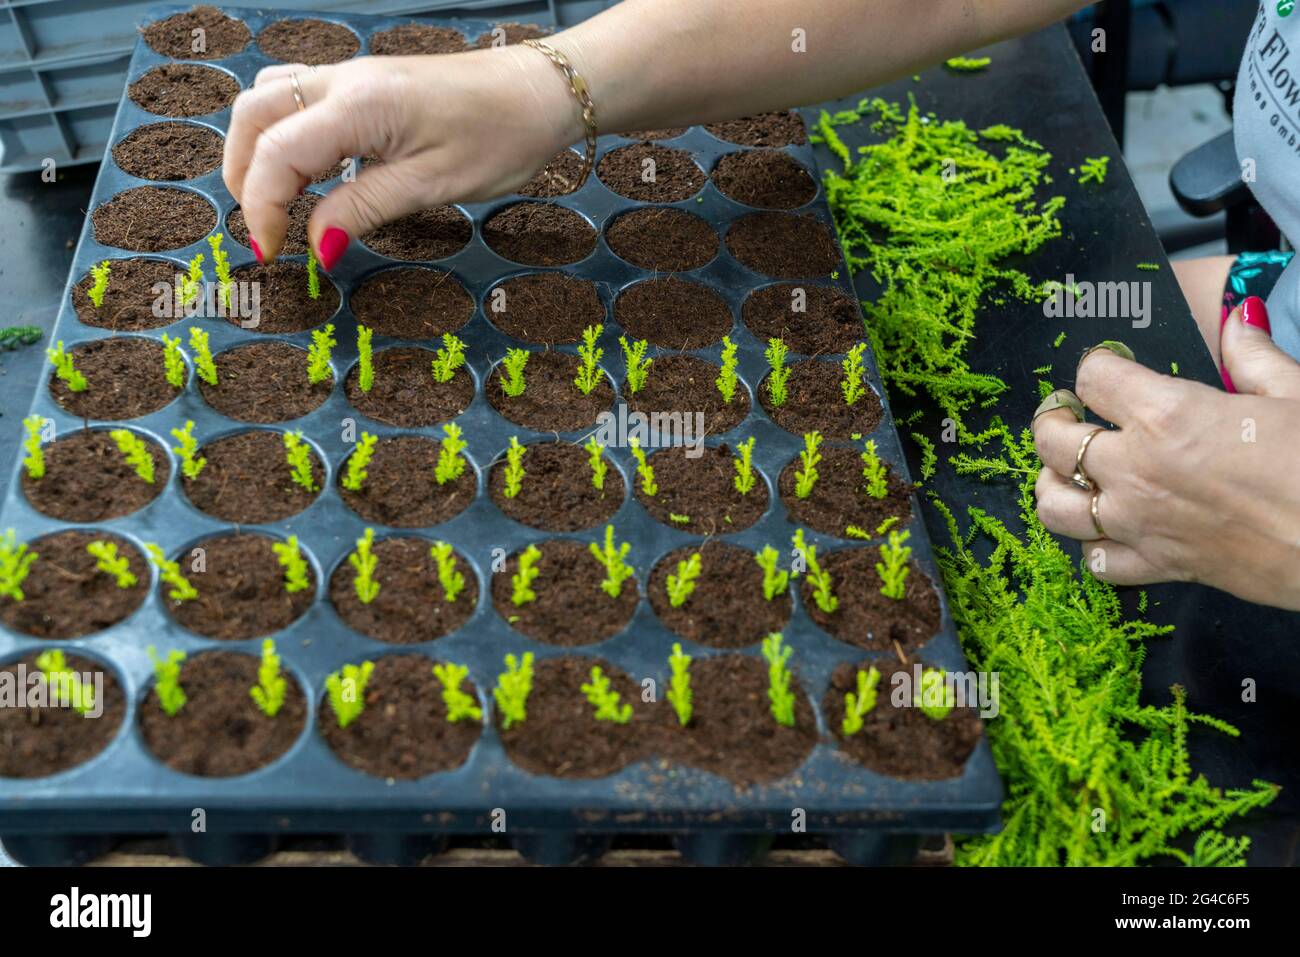 Horticultural business, cuttings, heather, broom heather, Calluna vulgaris are put by hand into small pots, trays, to let them grow before they are la Stock Photo